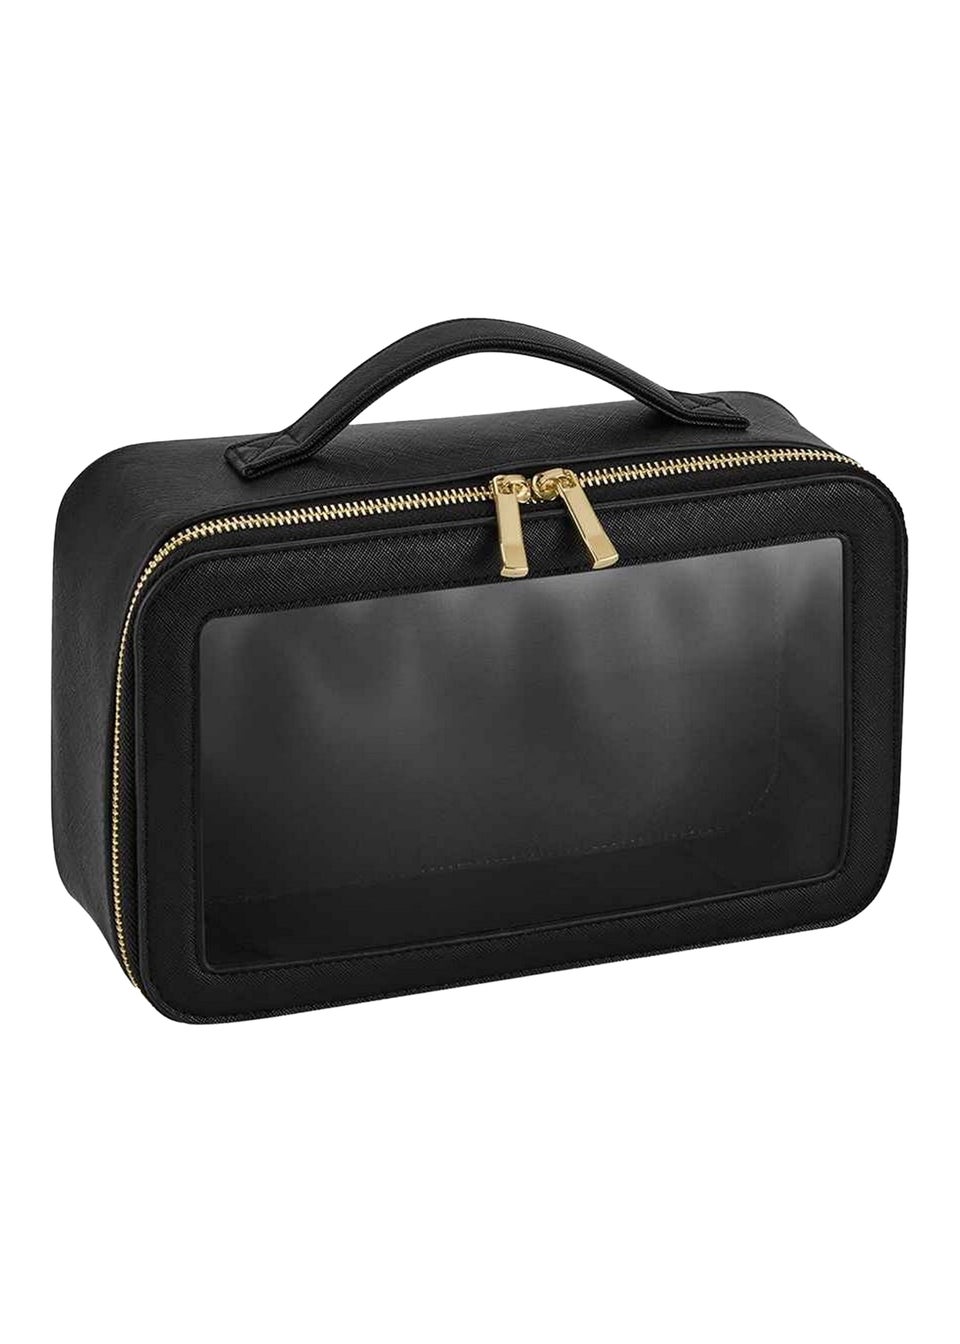 Bagbase Black Boutique Clear Toiletry Bag